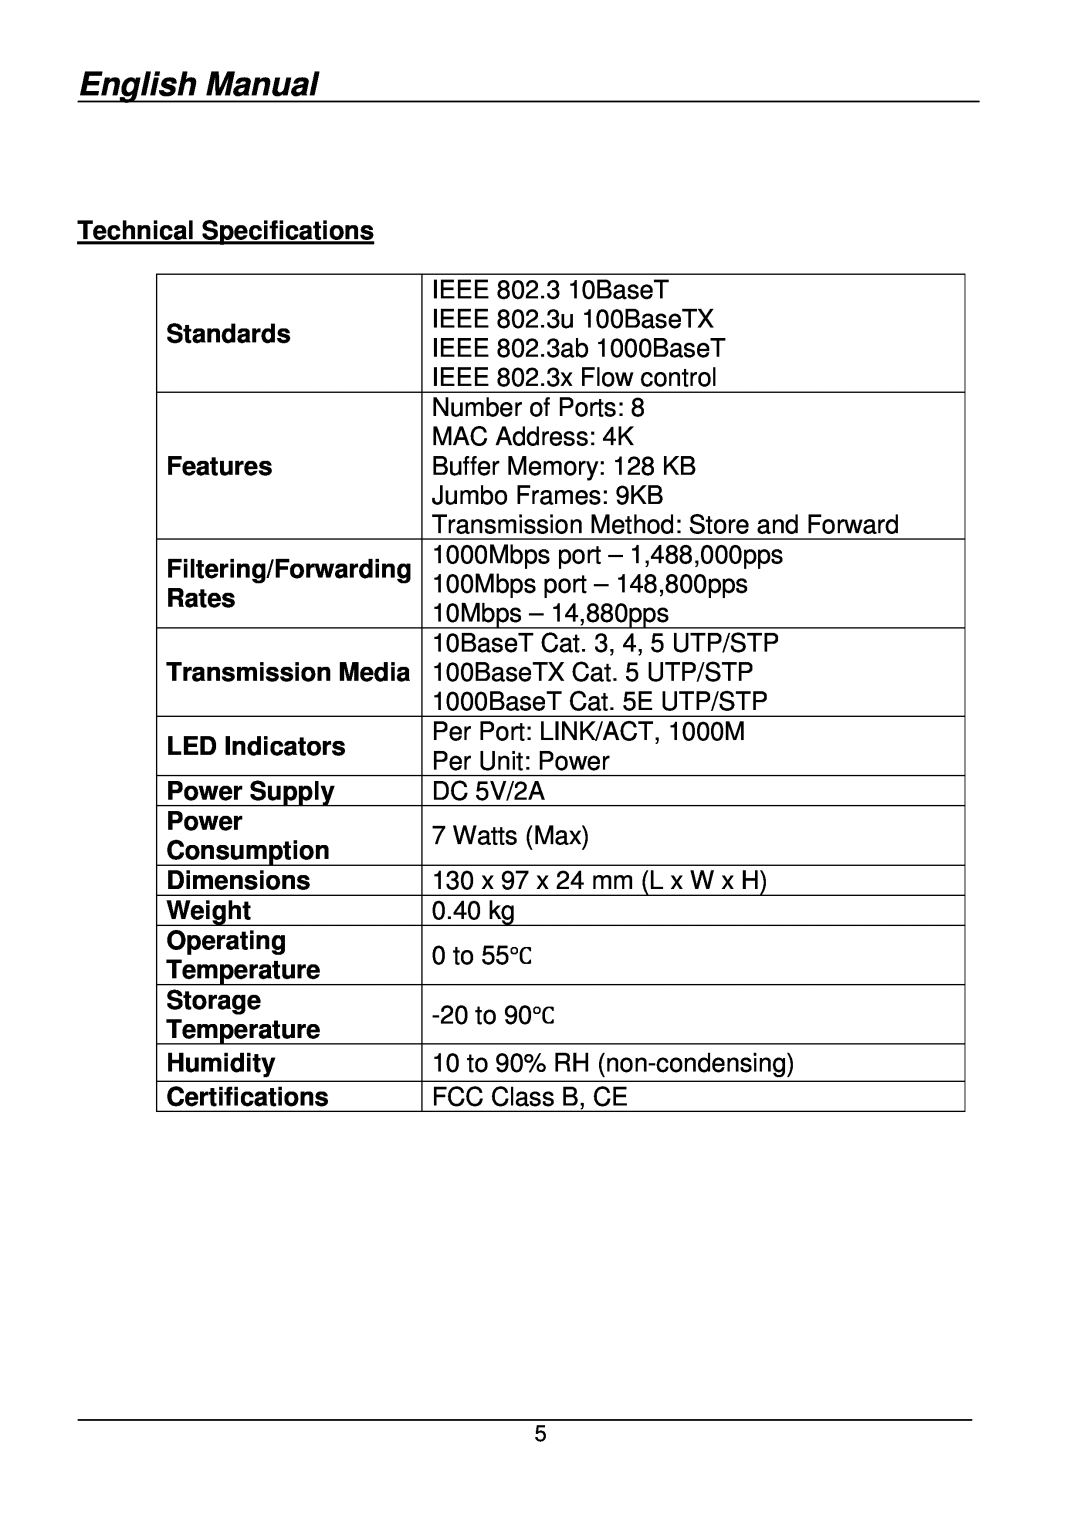 Lindy 25045 user manual English Manual, Technical Specifications 